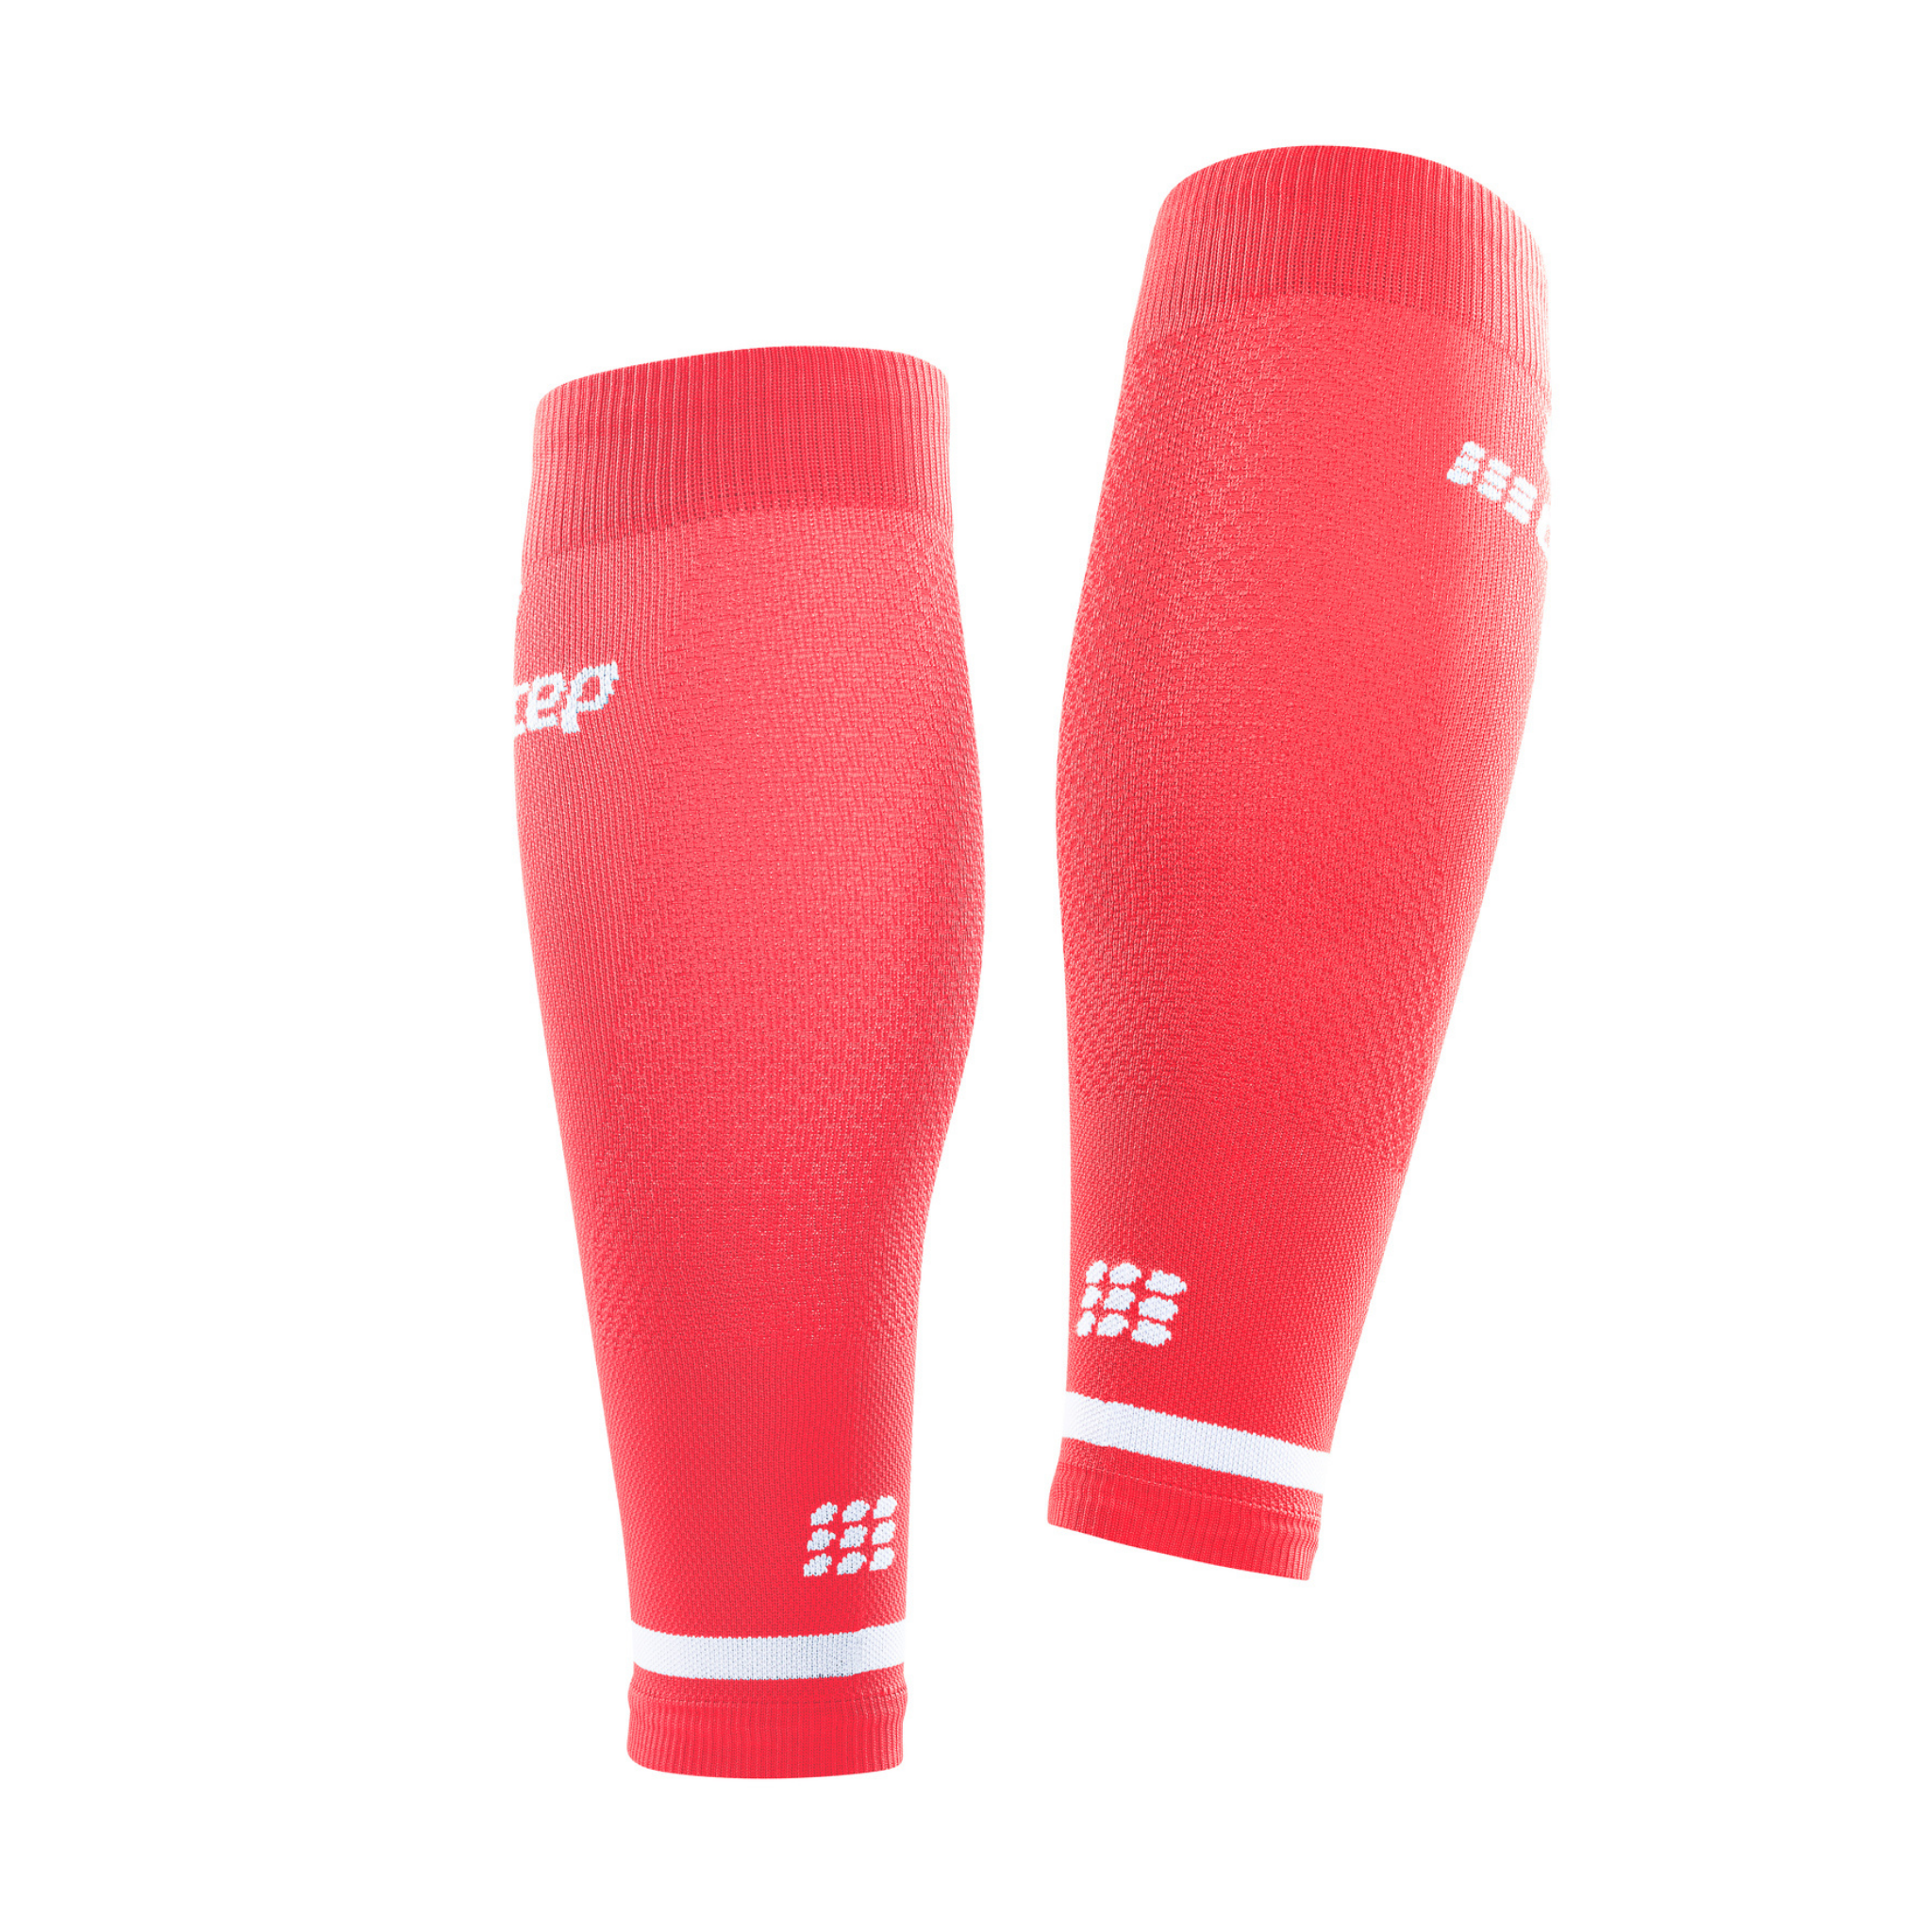 Compression Z Cycling Running Calf Sleeves Mens Large Orange Stay Grip